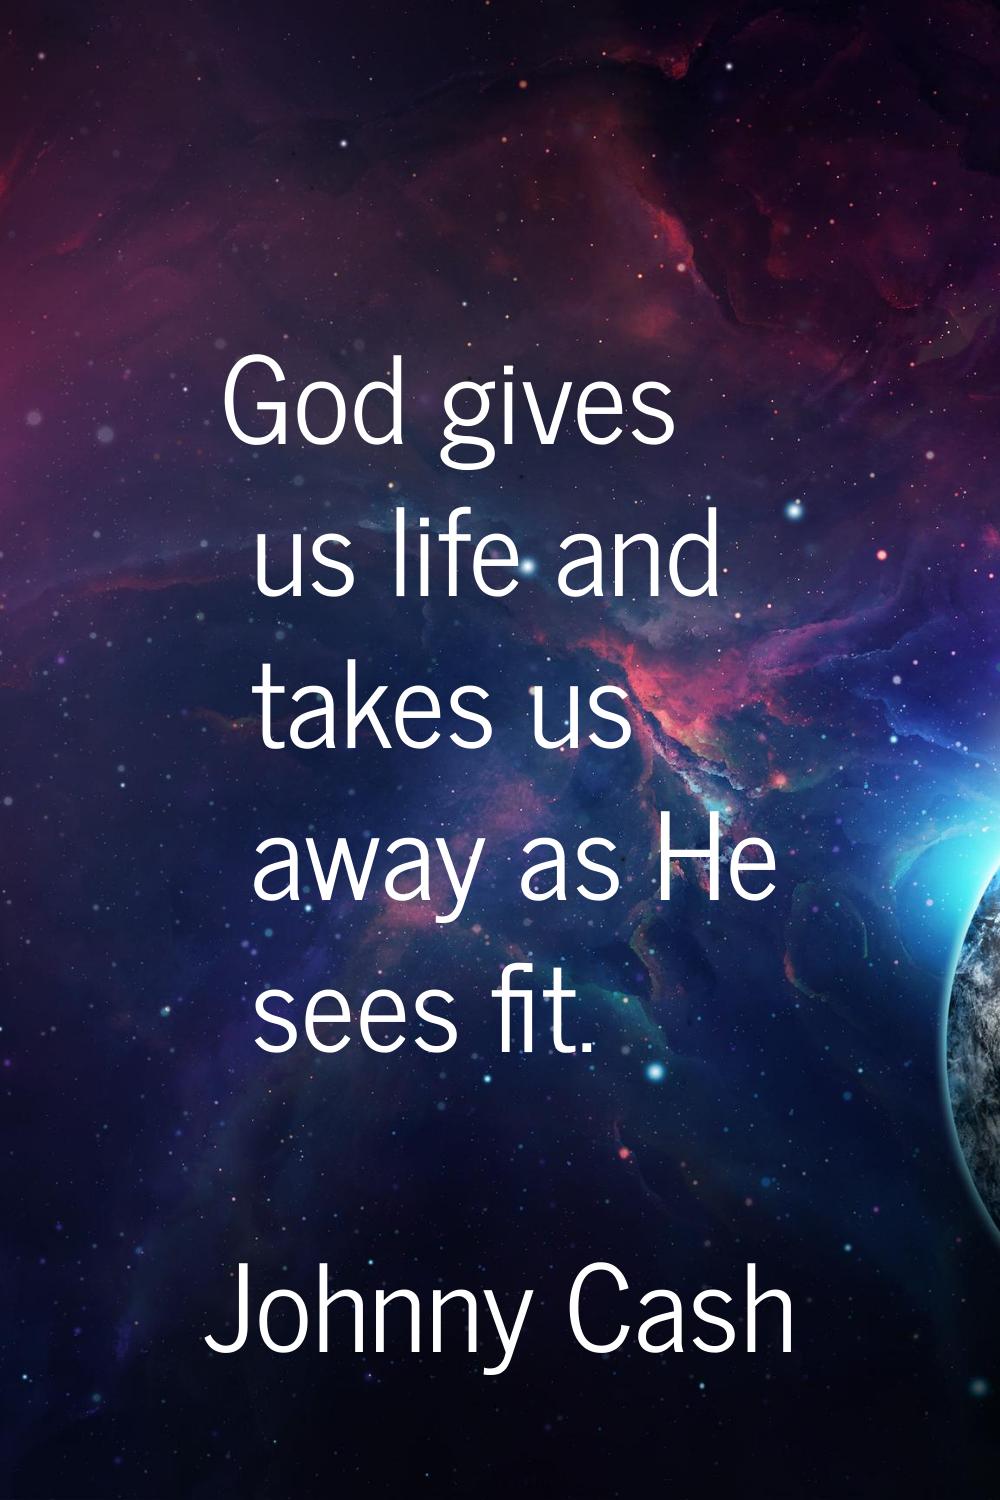 God gives us life and takes us away as He sees fit.